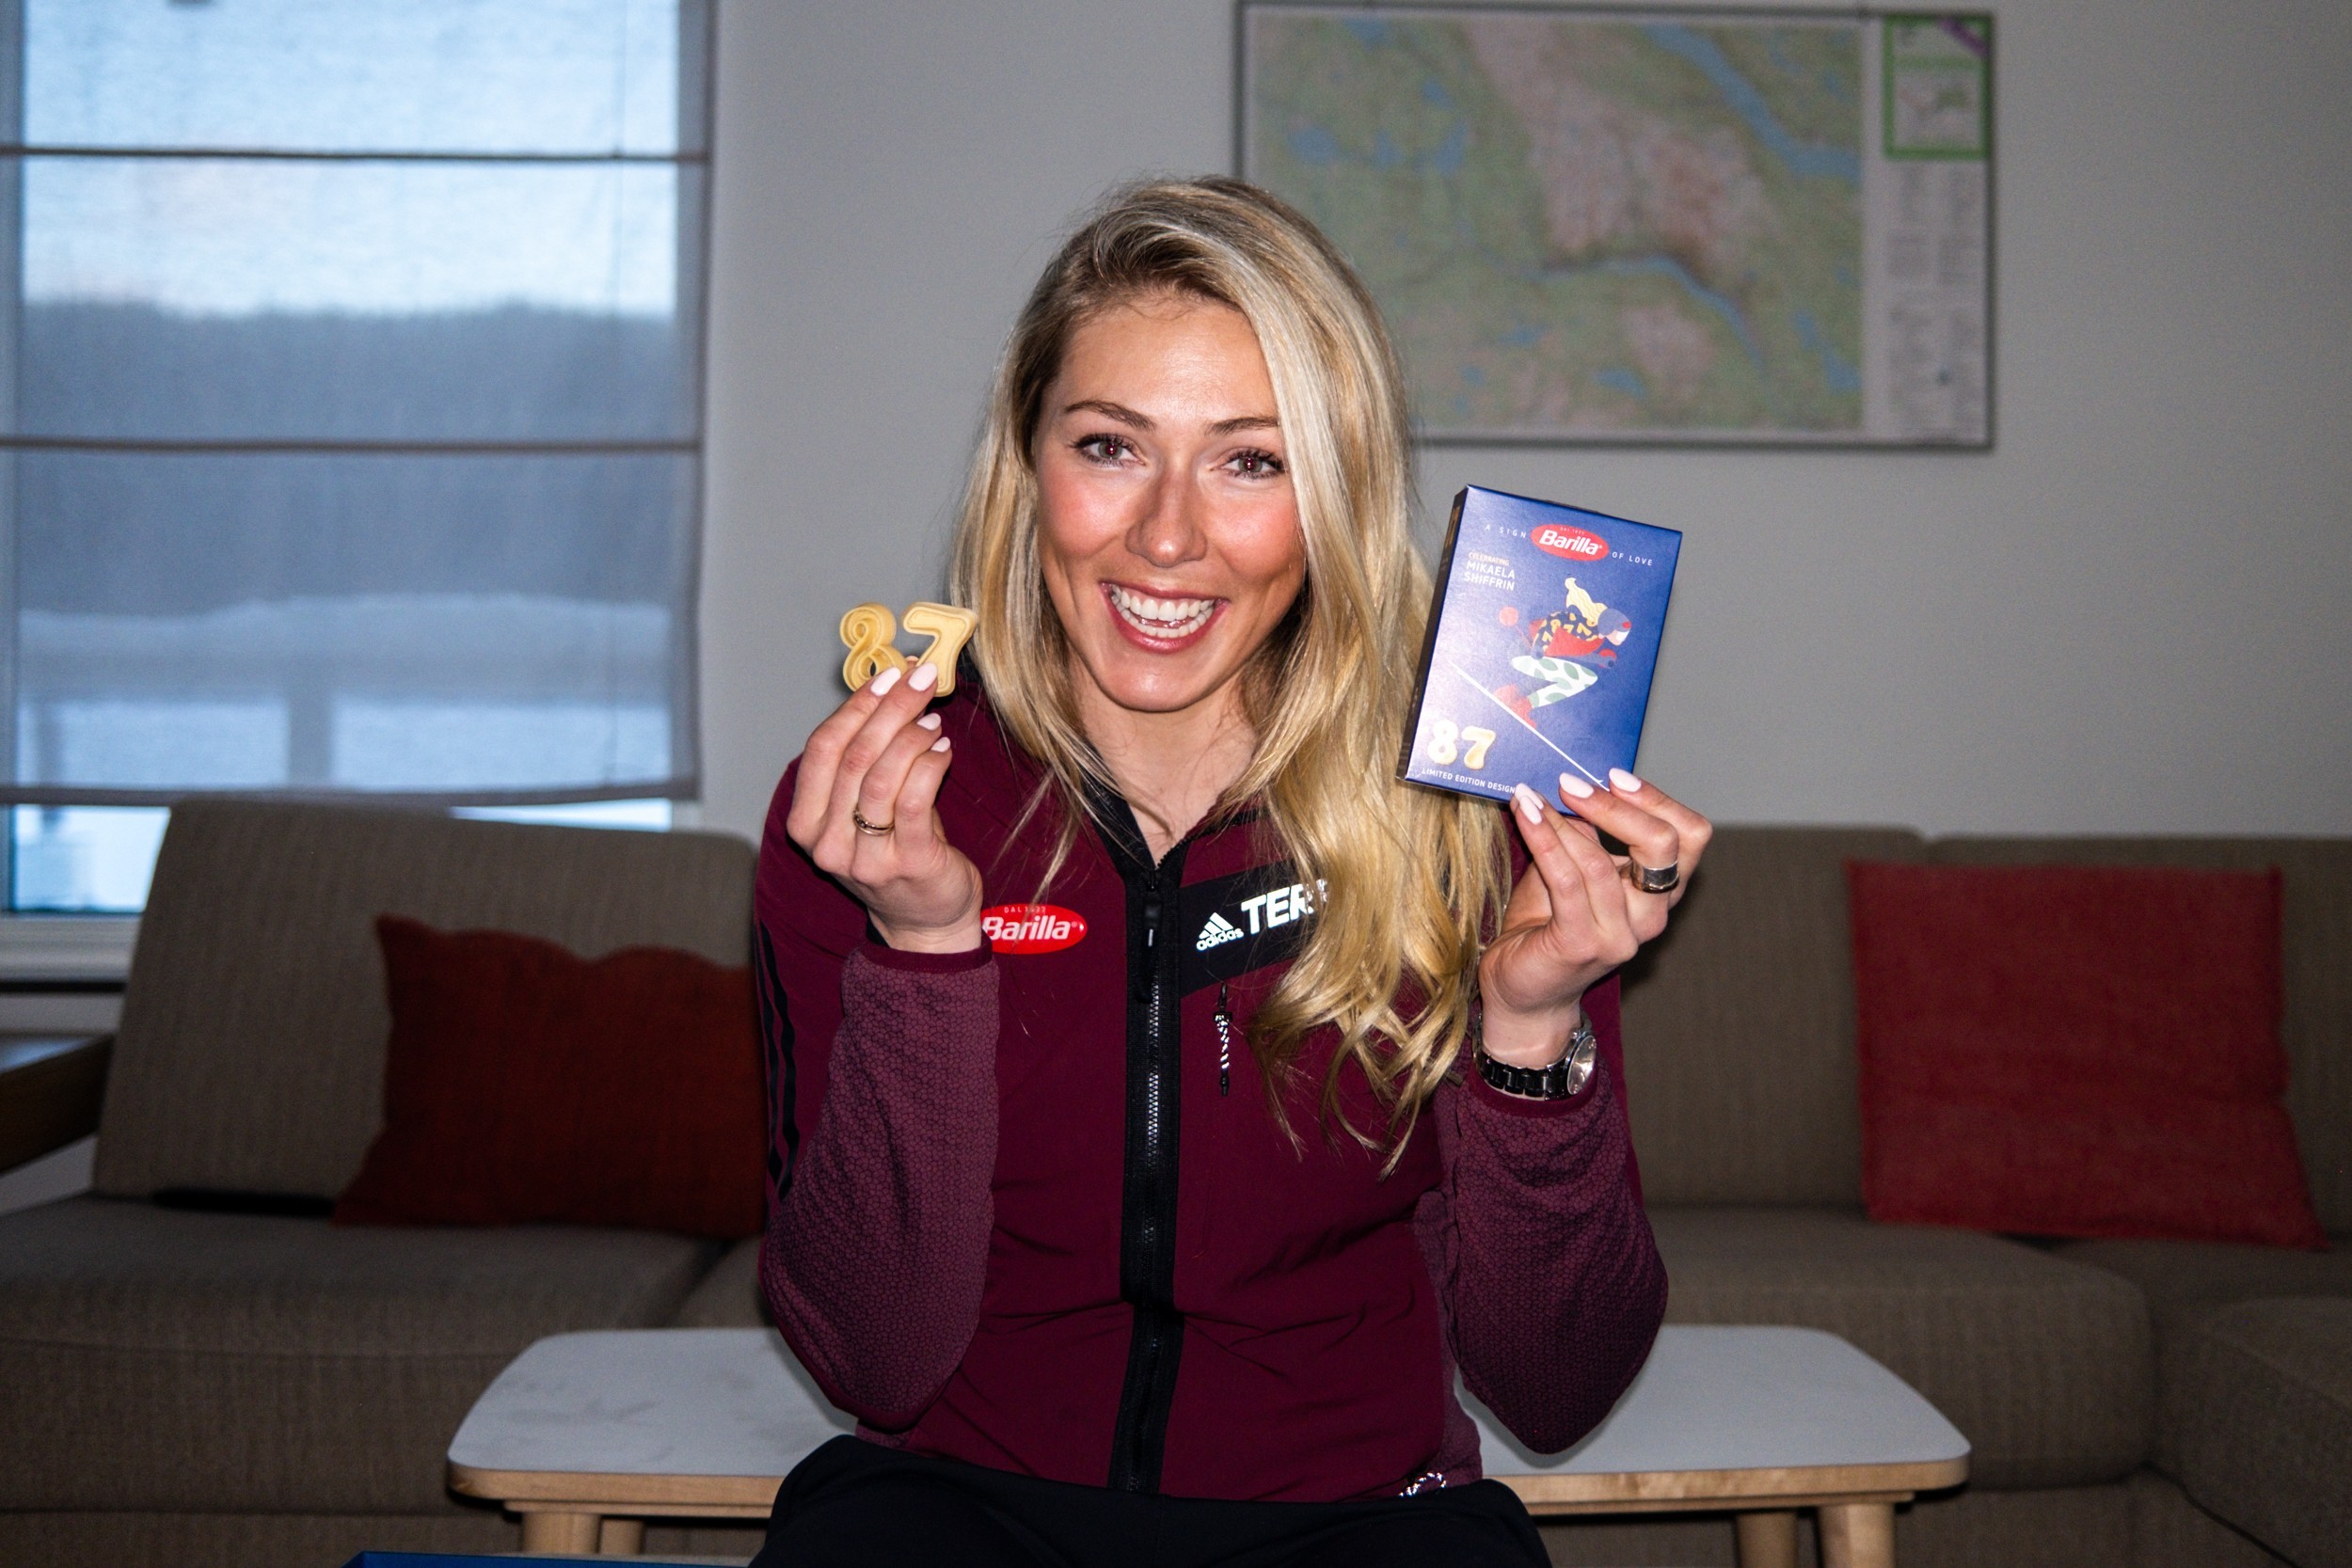 Barilla & Mikaela Shiffrin: Greatness starts with a great recipe - Pack No. 20 